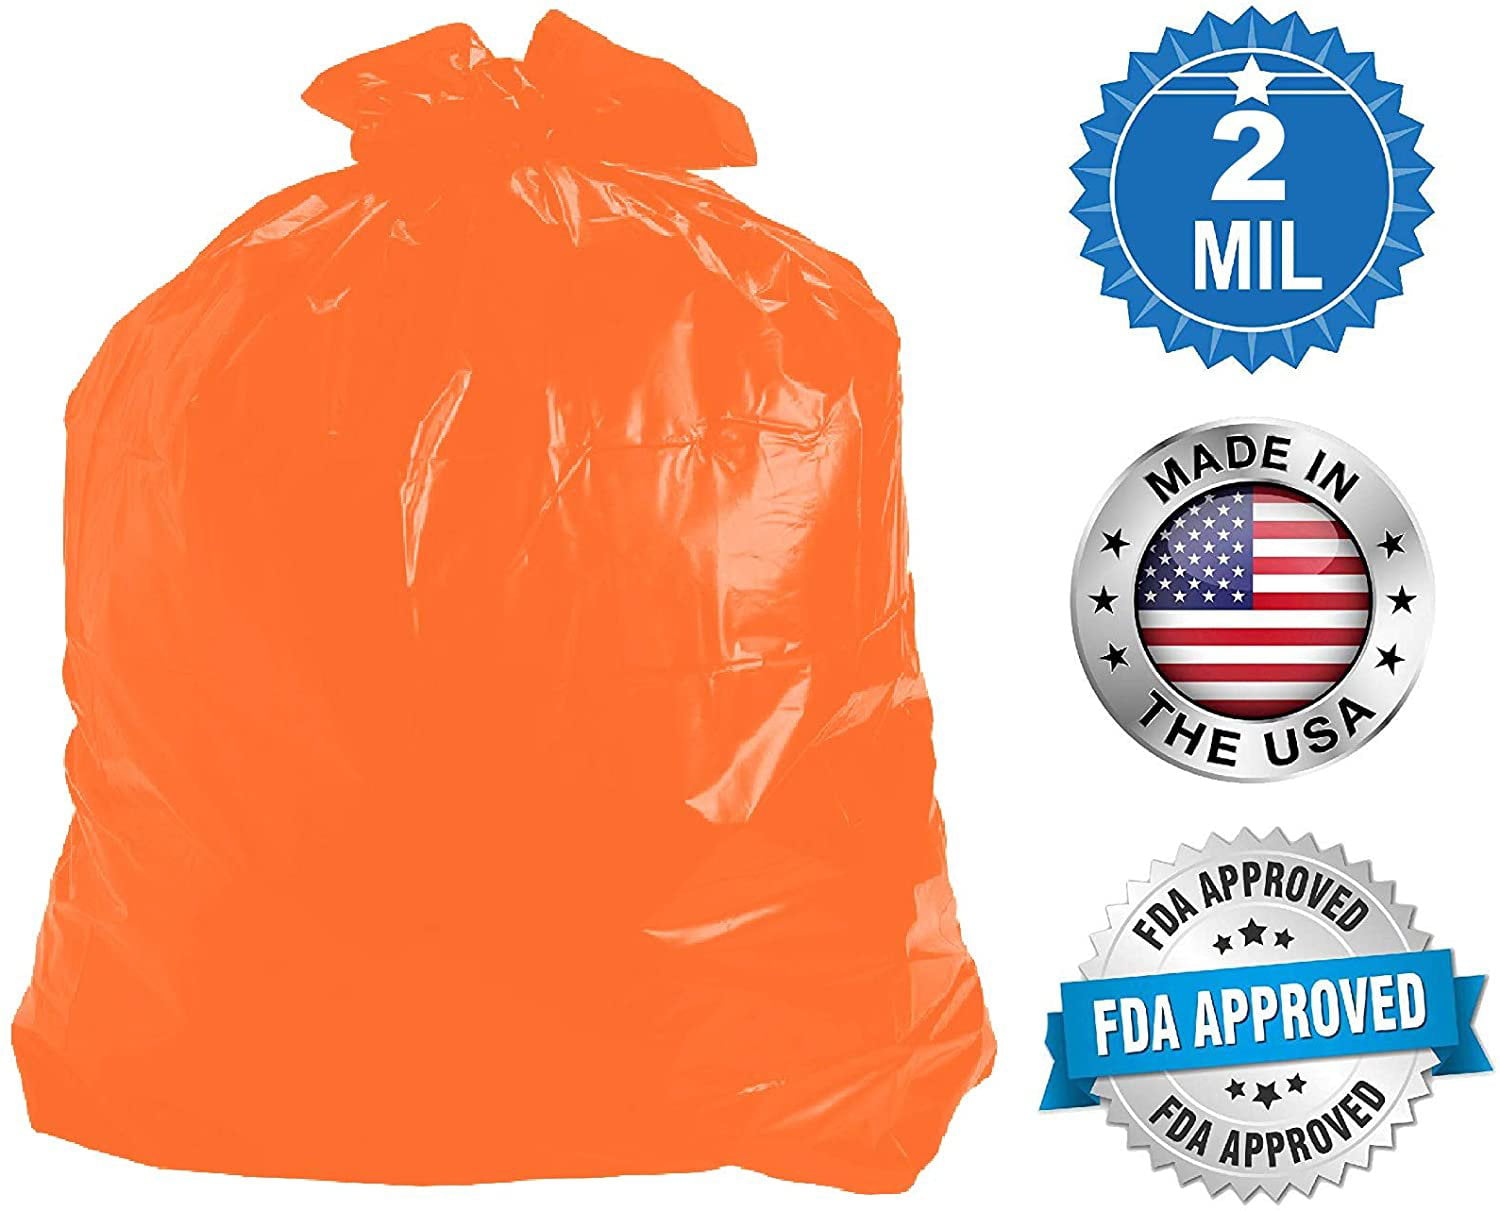 Dropship Pack Of 20 Heavy Duty Can Liners 43 X 47. Low Density Orange Trash  Liners 43x47. Thickness 2 Mil. Trash Bags 56 Gallon. Puncture; Tear  Resistance. Performance Bottom Seal. to Sell